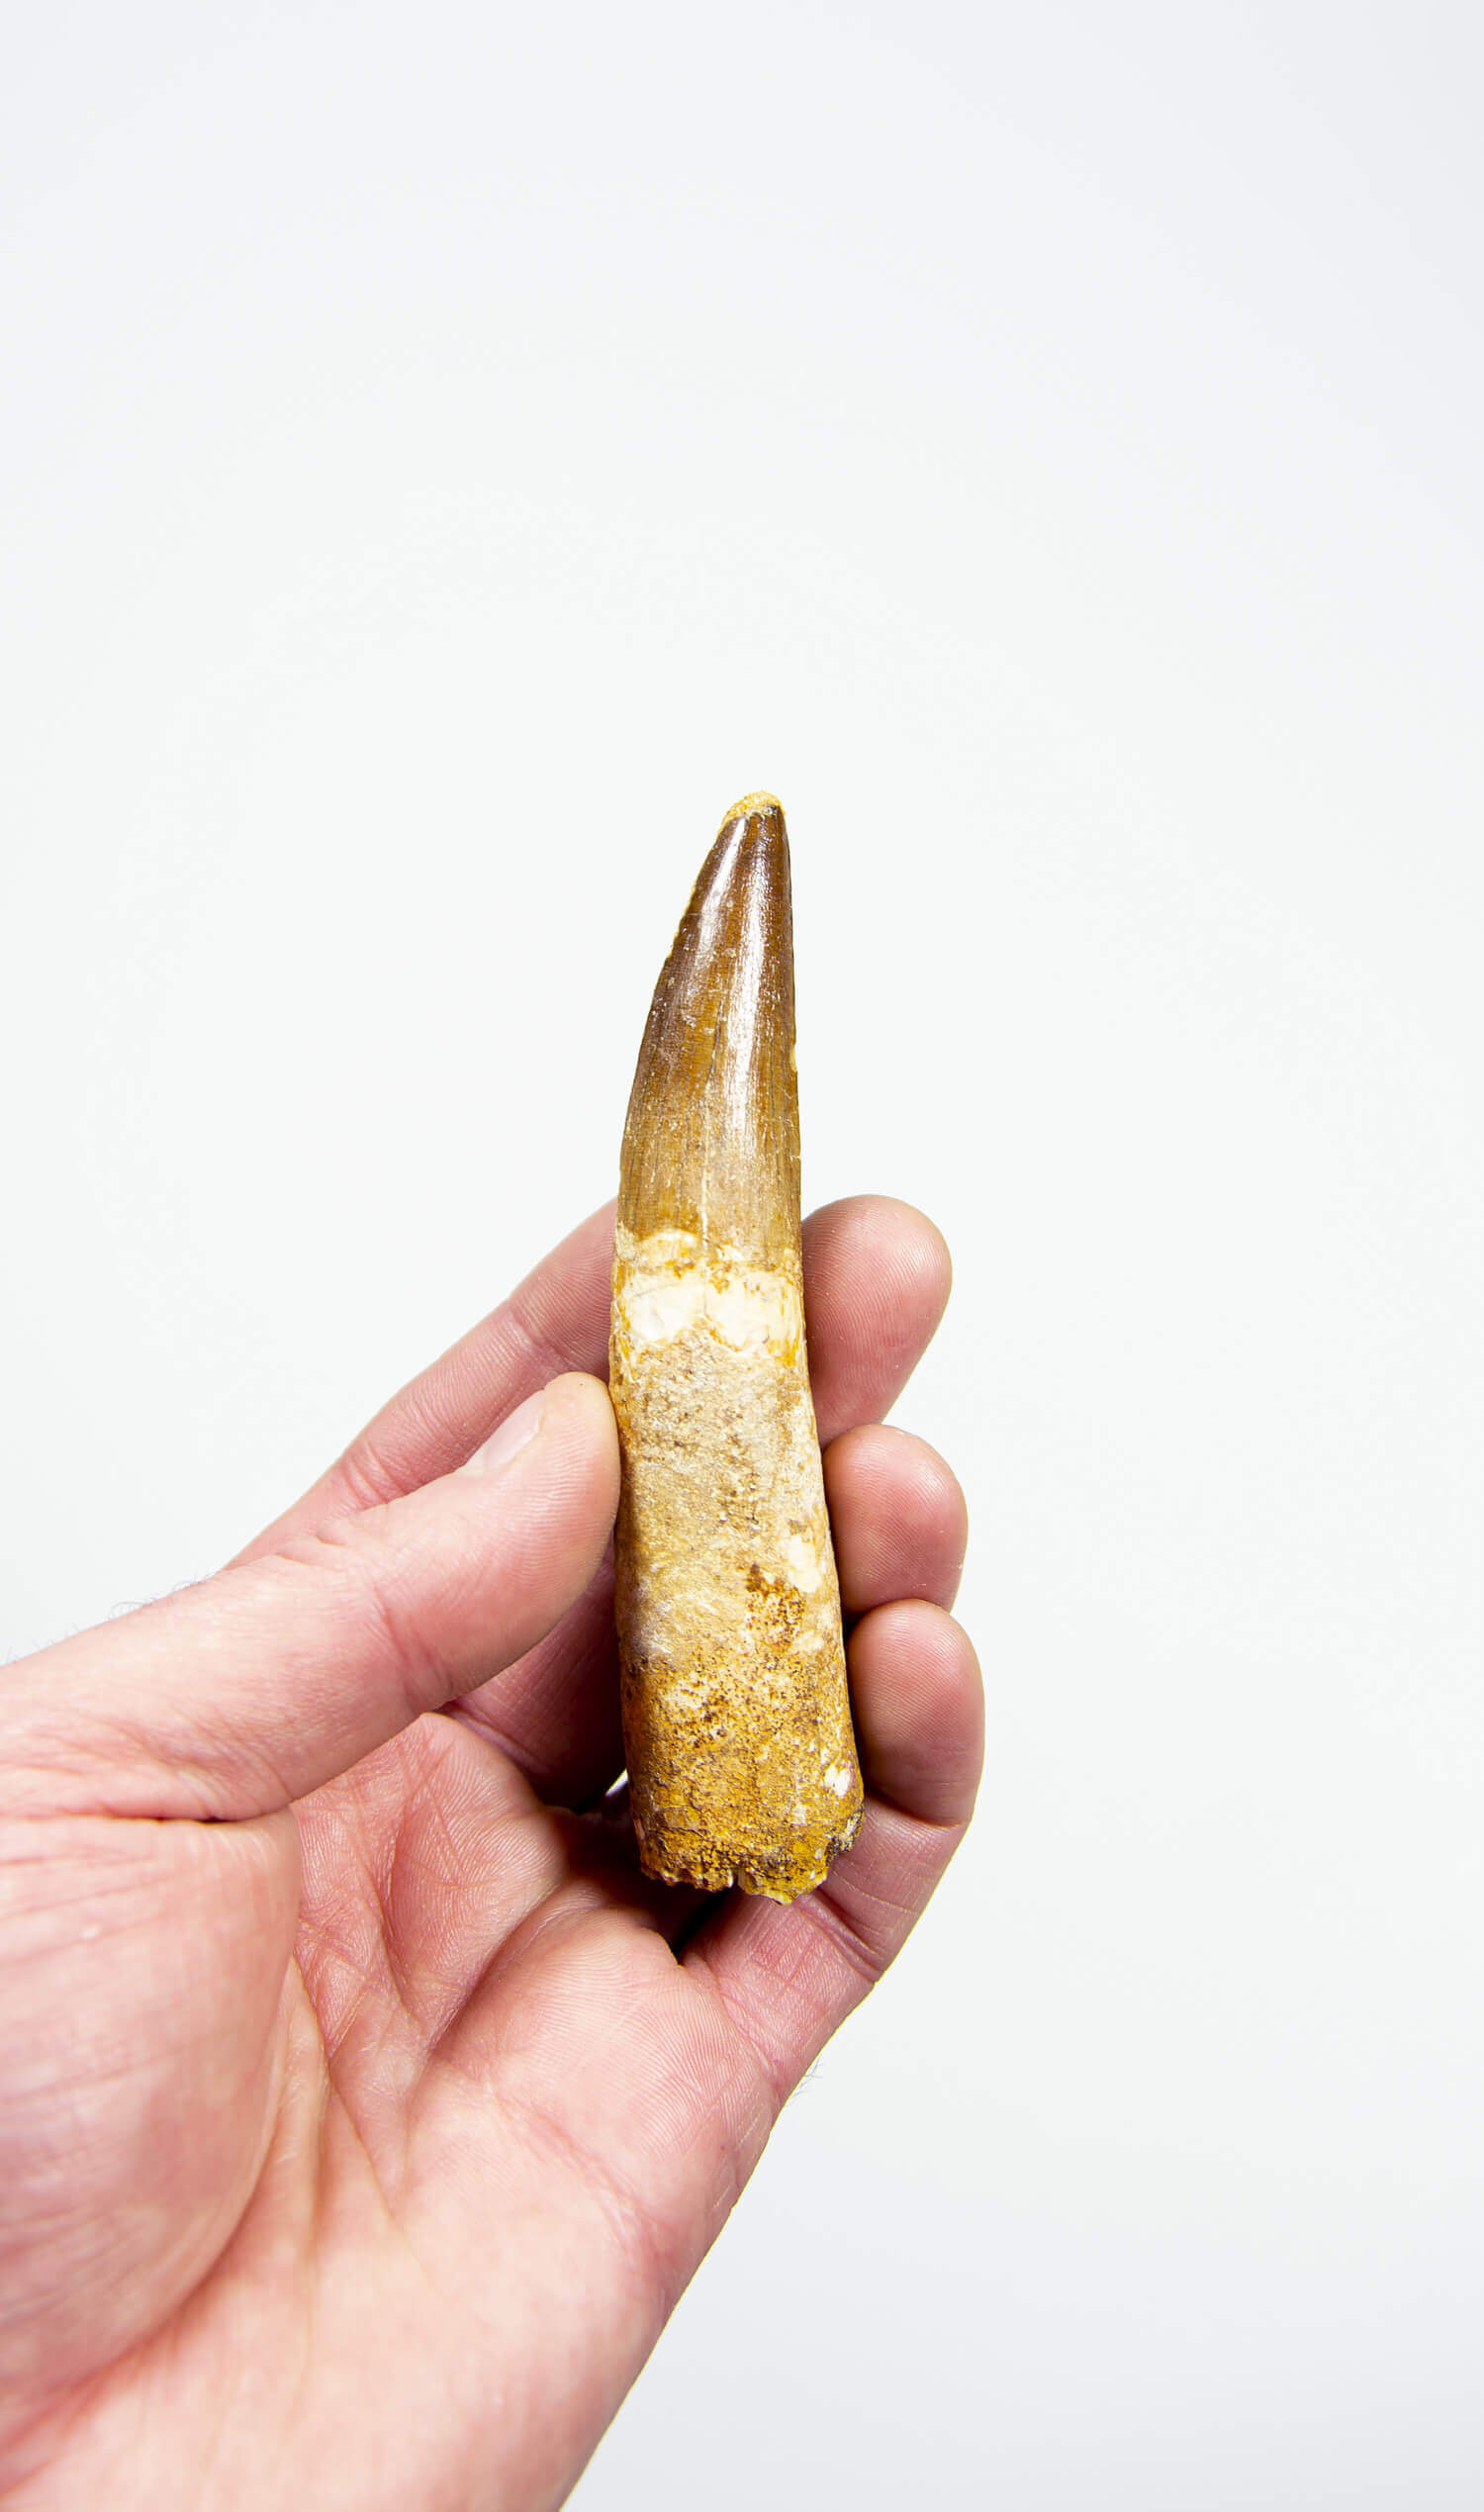 fossil dinosaur spinosaurus tooth for sale at the uk fossil store 114